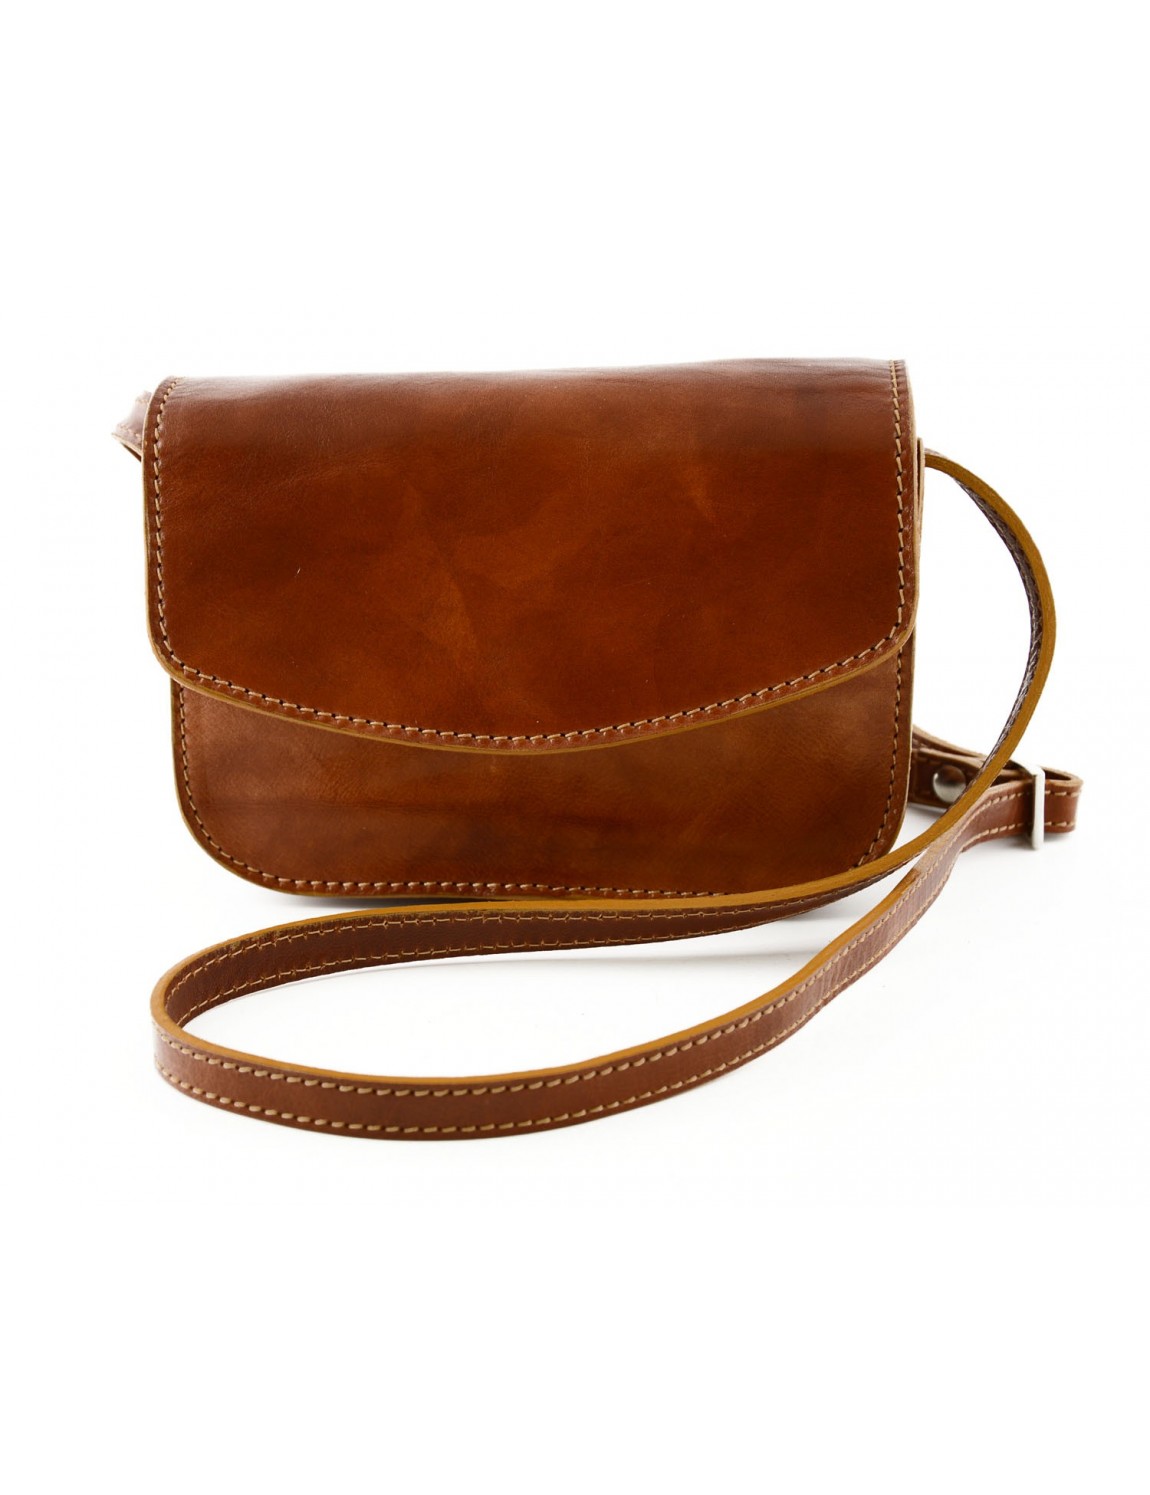 Mini Woman Crossbody Bag in Genuine Leather with 3 compartments - Eliana